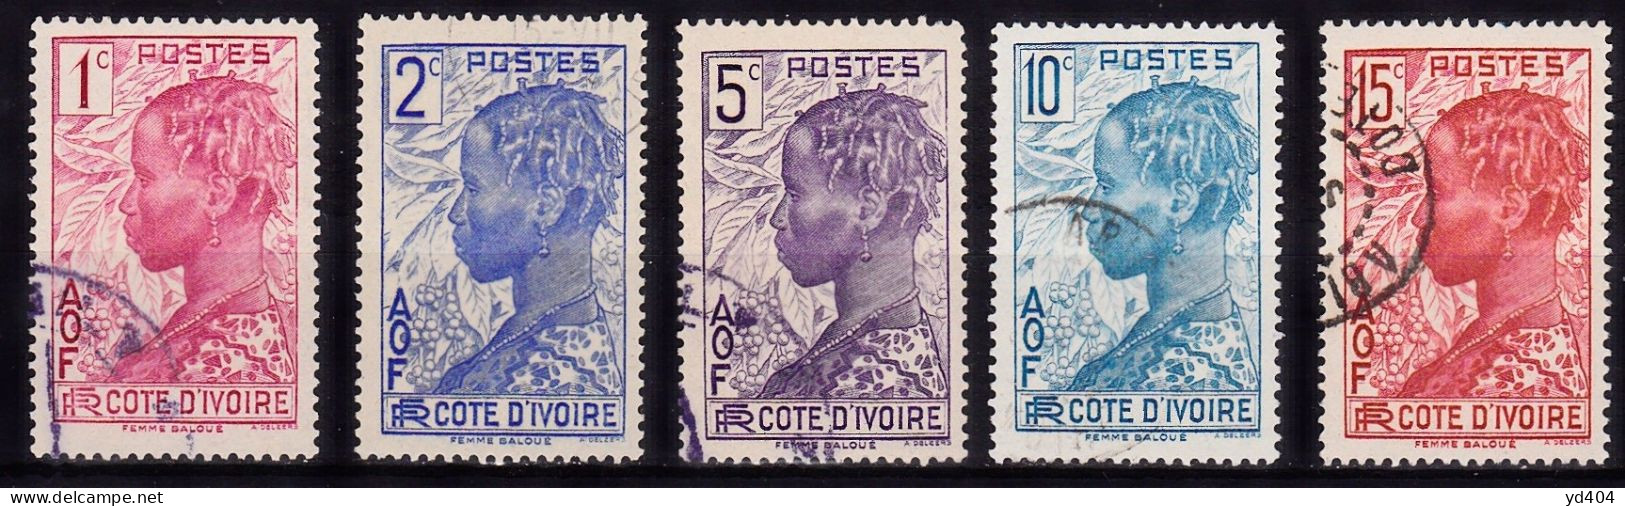 CF-CI-07 – FRENCH COLONIES – IVORY COAST – 1936-42 – DEFINITIVE SET USED - CV 89 € - Used Stamps